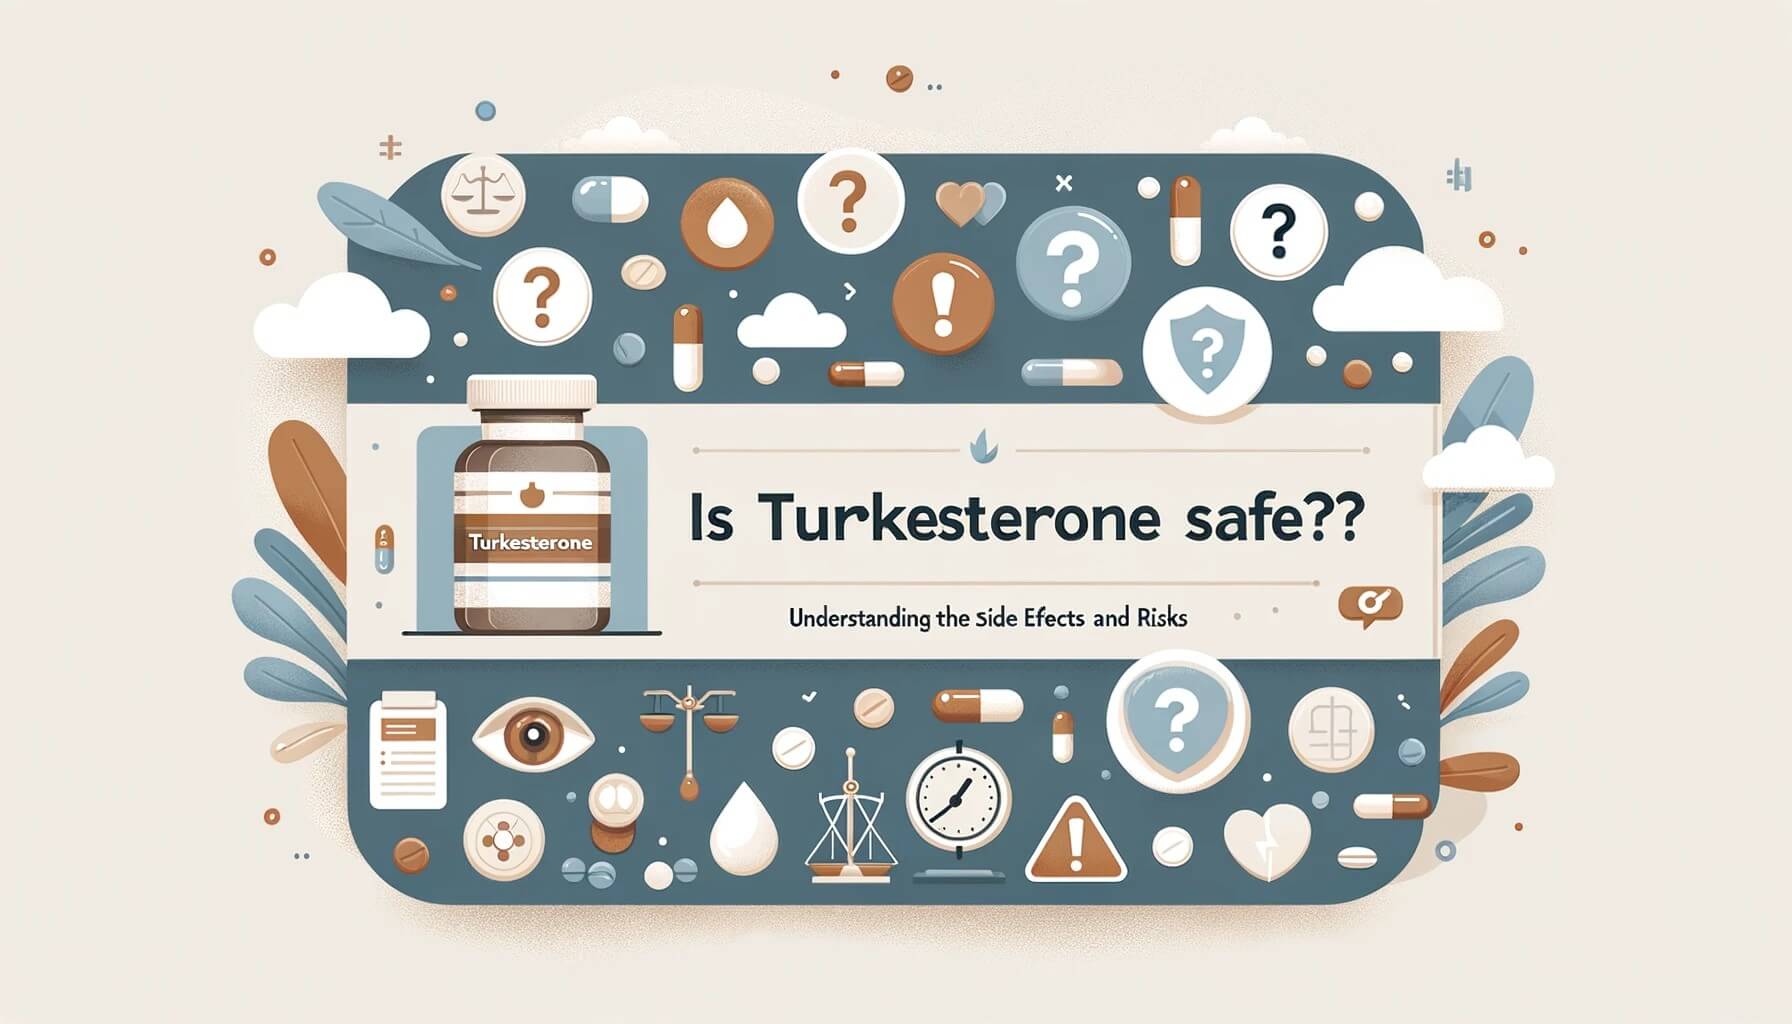 asking the question of turkesterone